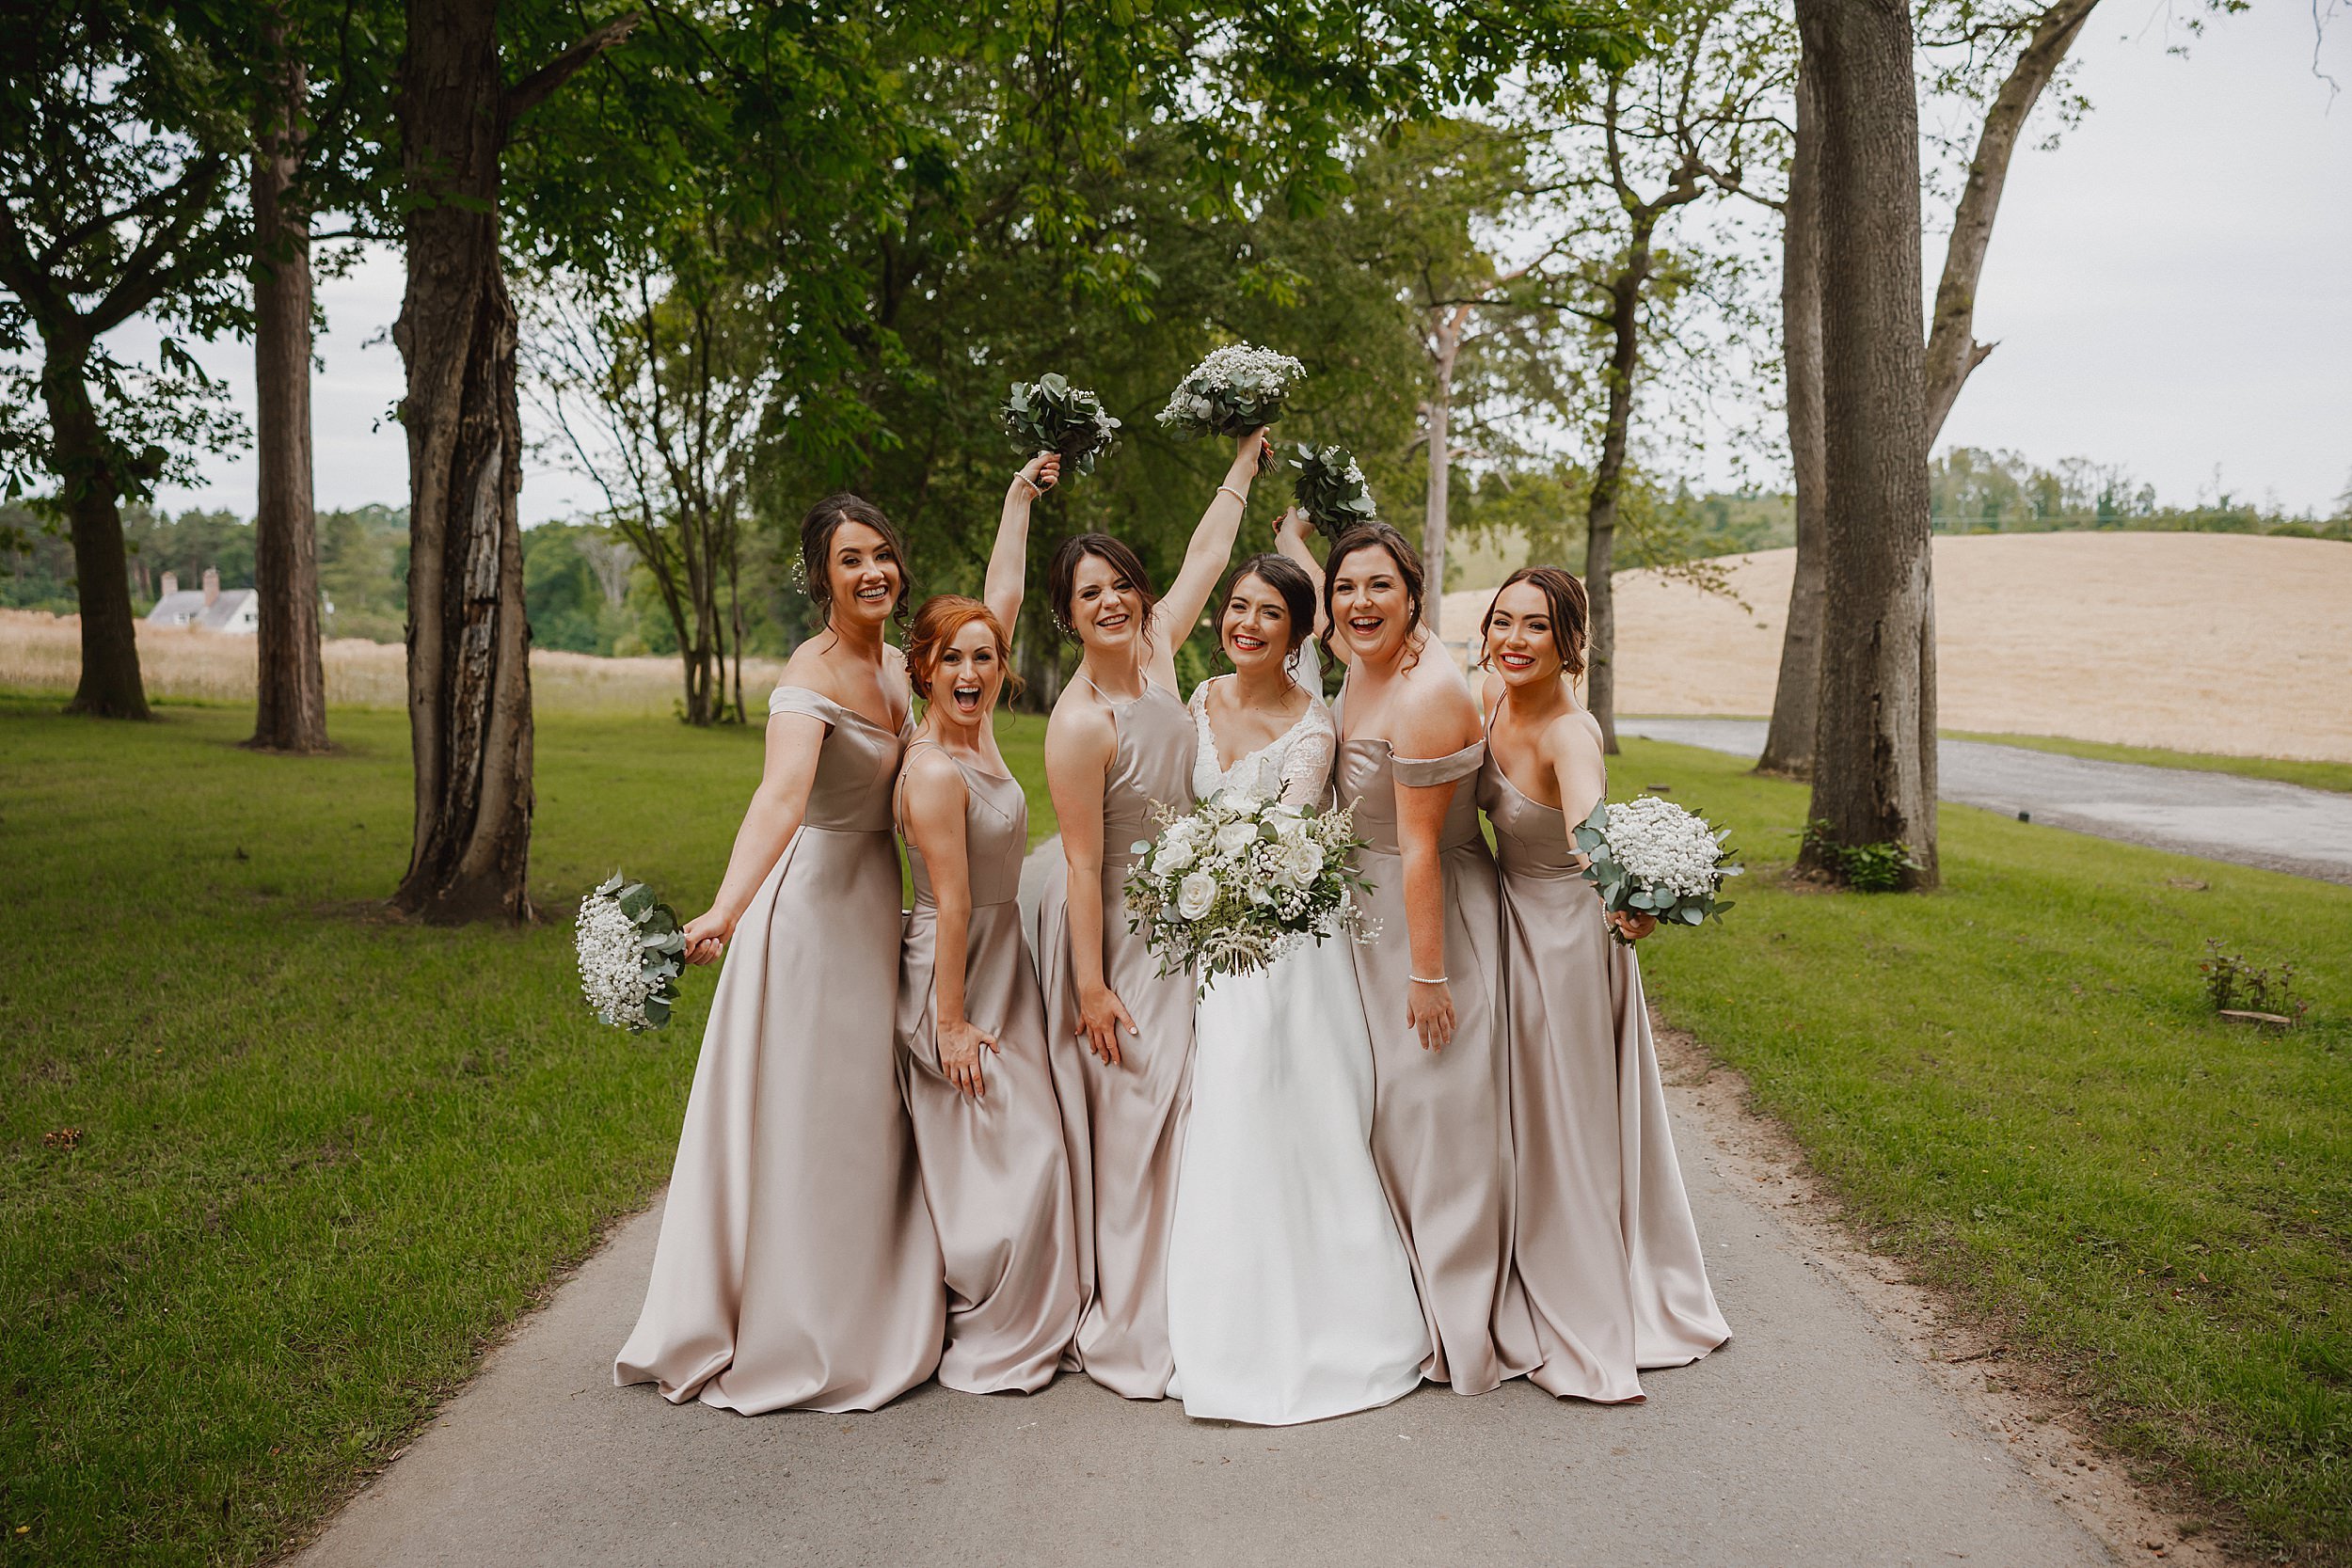 Bride and bridesmaids in grounds of Enterkine House Hotel on wedding day